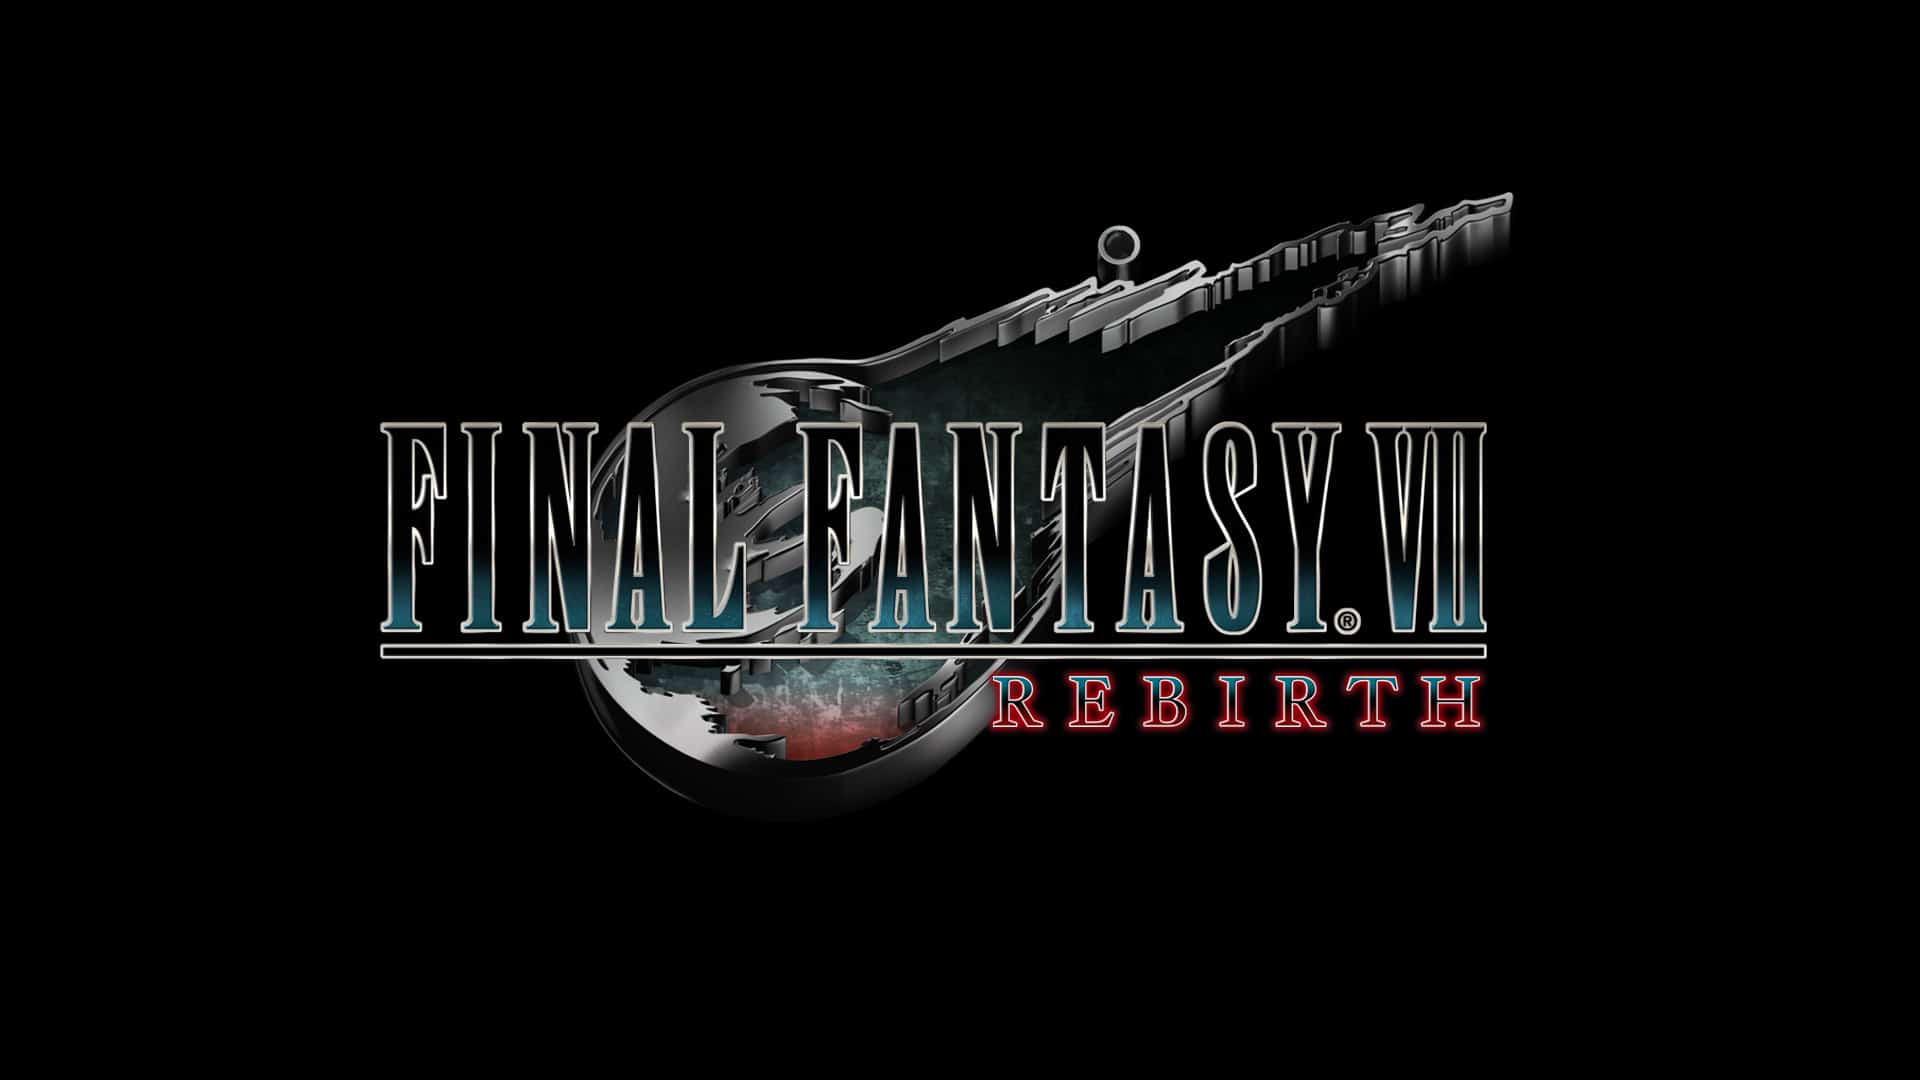 Final Fantasy 7 Rebirth: Part 2 of the Remake Trilogy is coming in 2023 - News